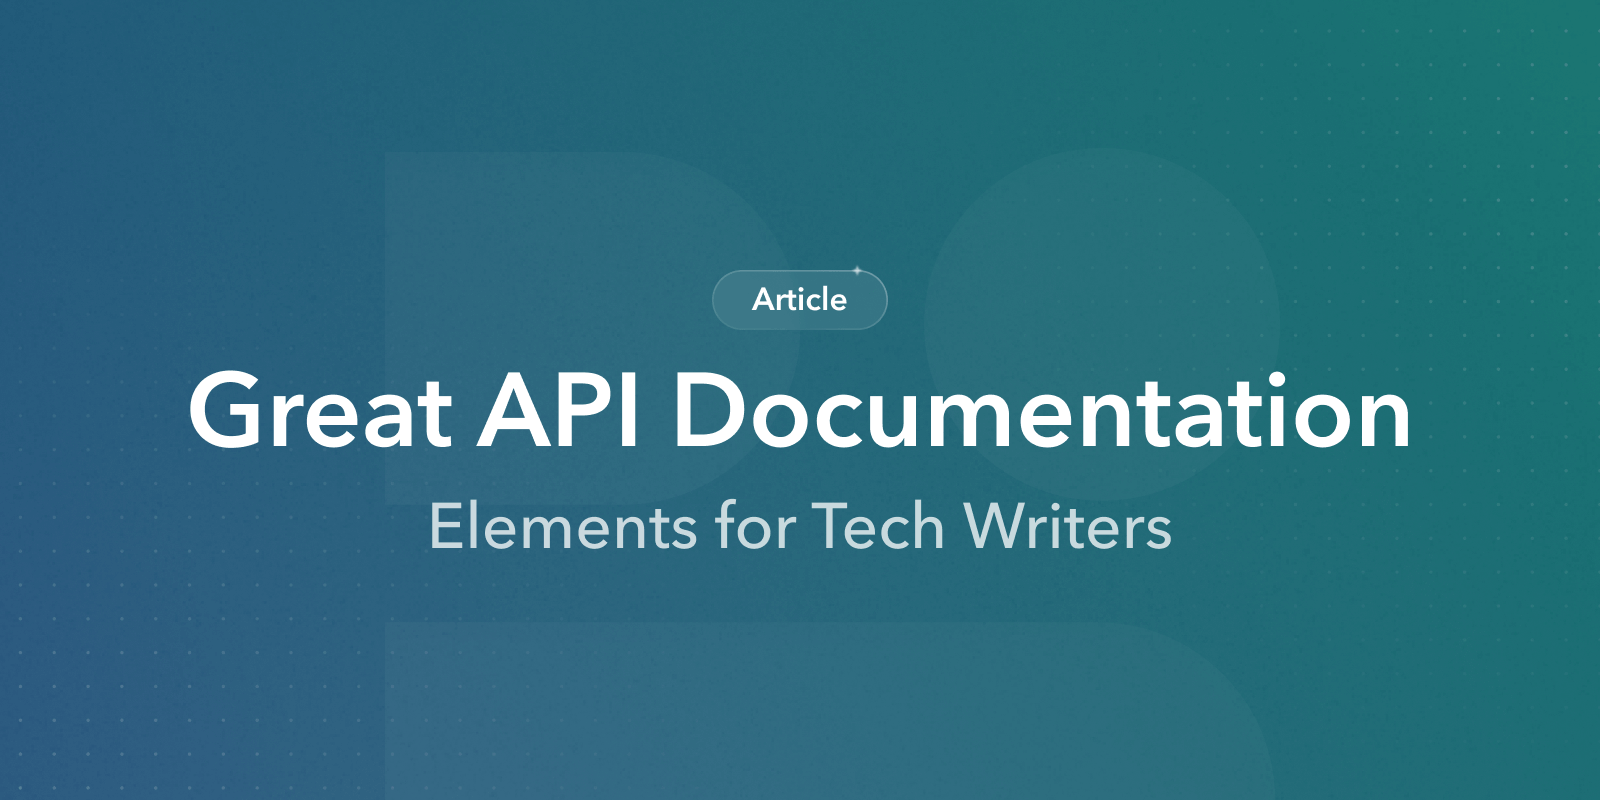 When you think of API documentation, what comes to mind? More than likely, you think of reference documentation that describes how to use an API, incl